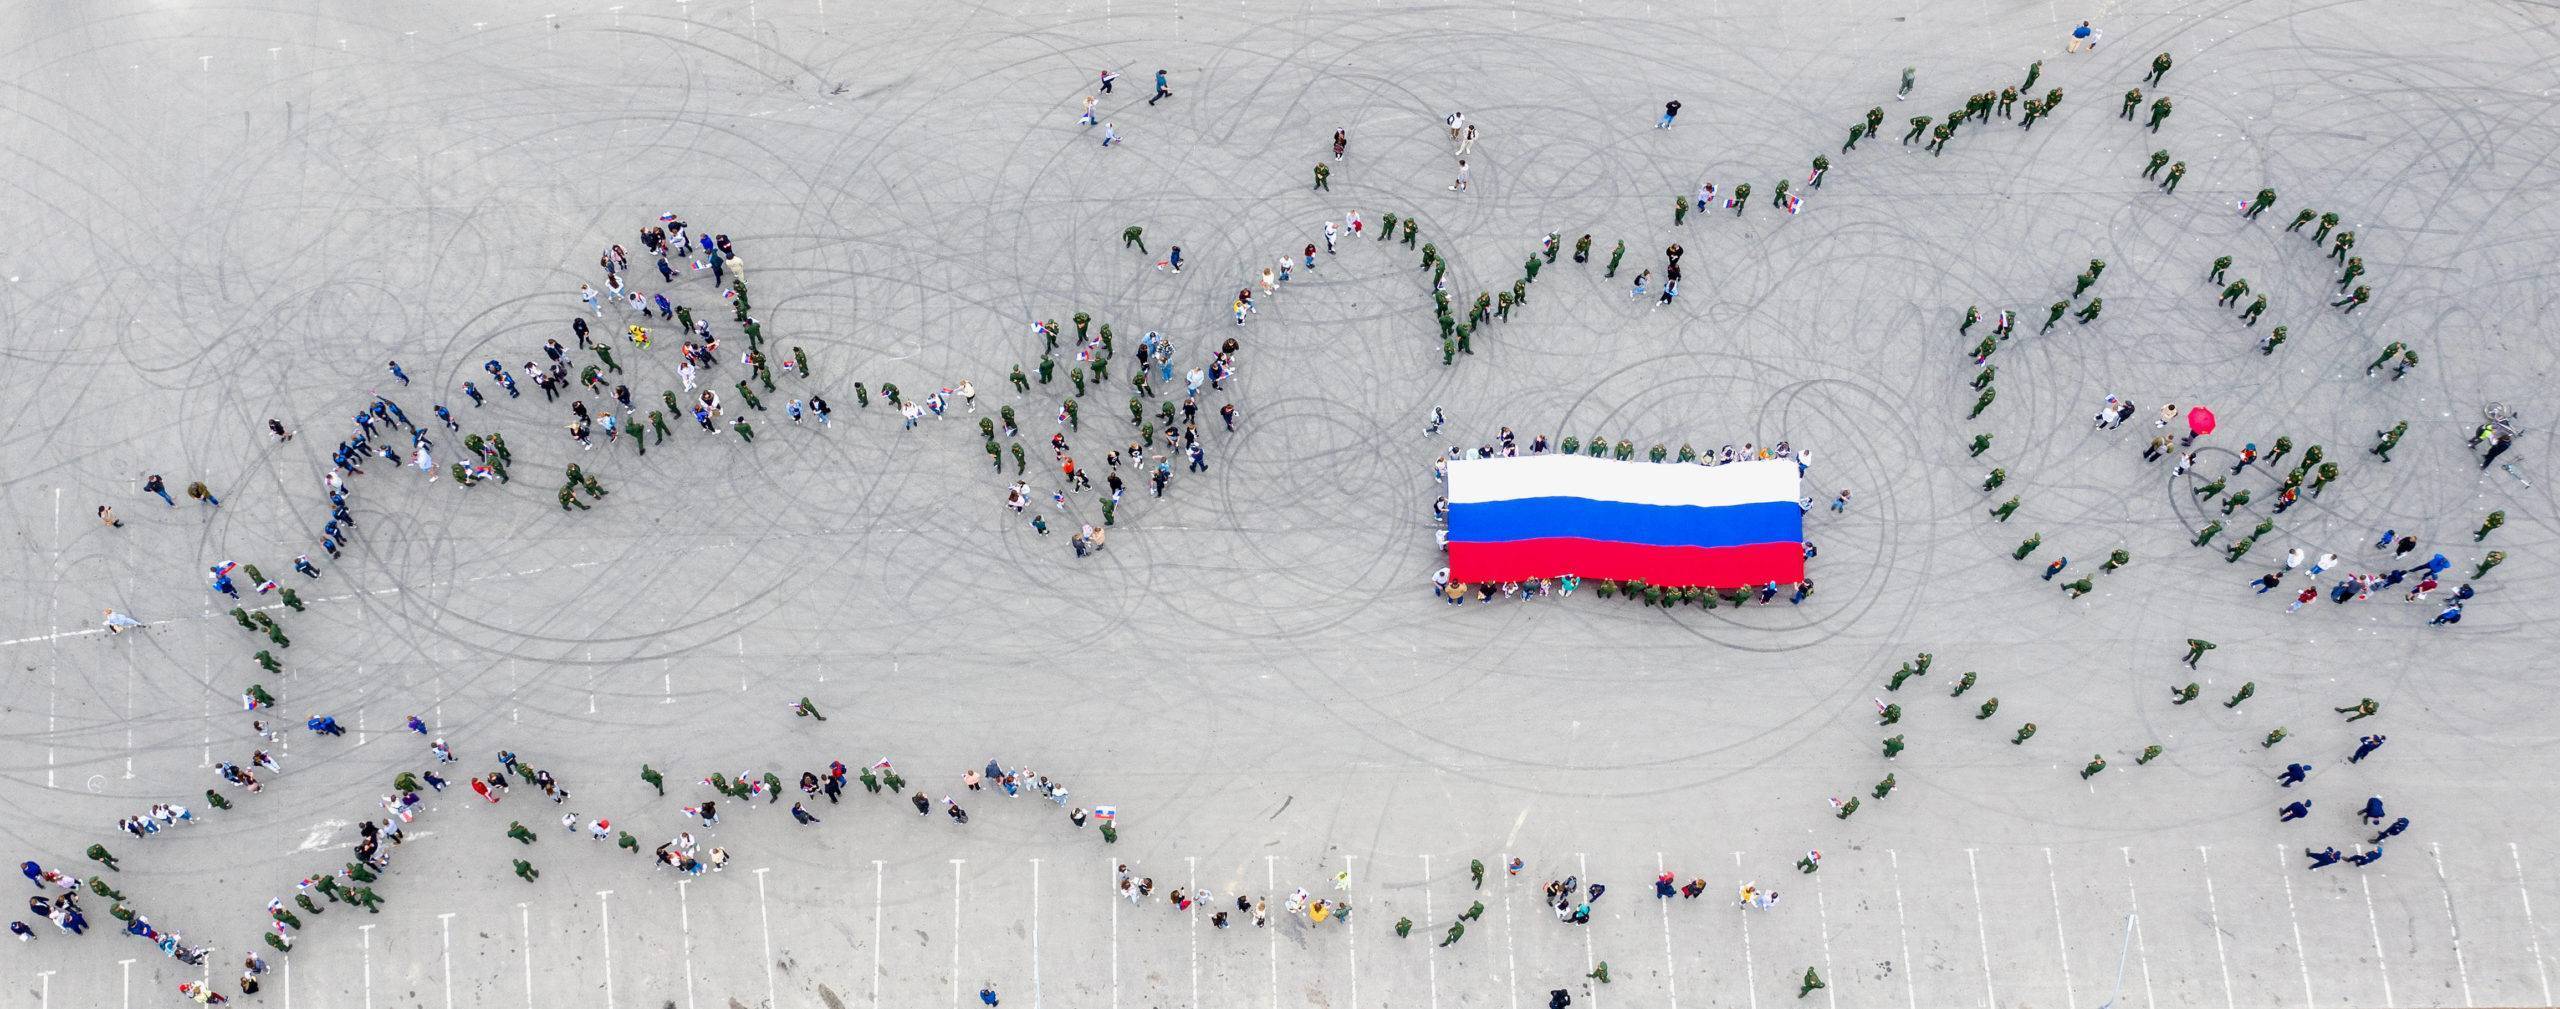 YUZHNO-SAKHALINSK, RUSSIA - JUNE 12, 2021: People gather to form the shape of Russia as it appears on the world map during the #WeRussia flash mob as part of celebrations of Russia Day in Gornolyzhnaya Street. Sergei Krasnoukhov/TASS/Sipa USA/33720645/AK/2106121012